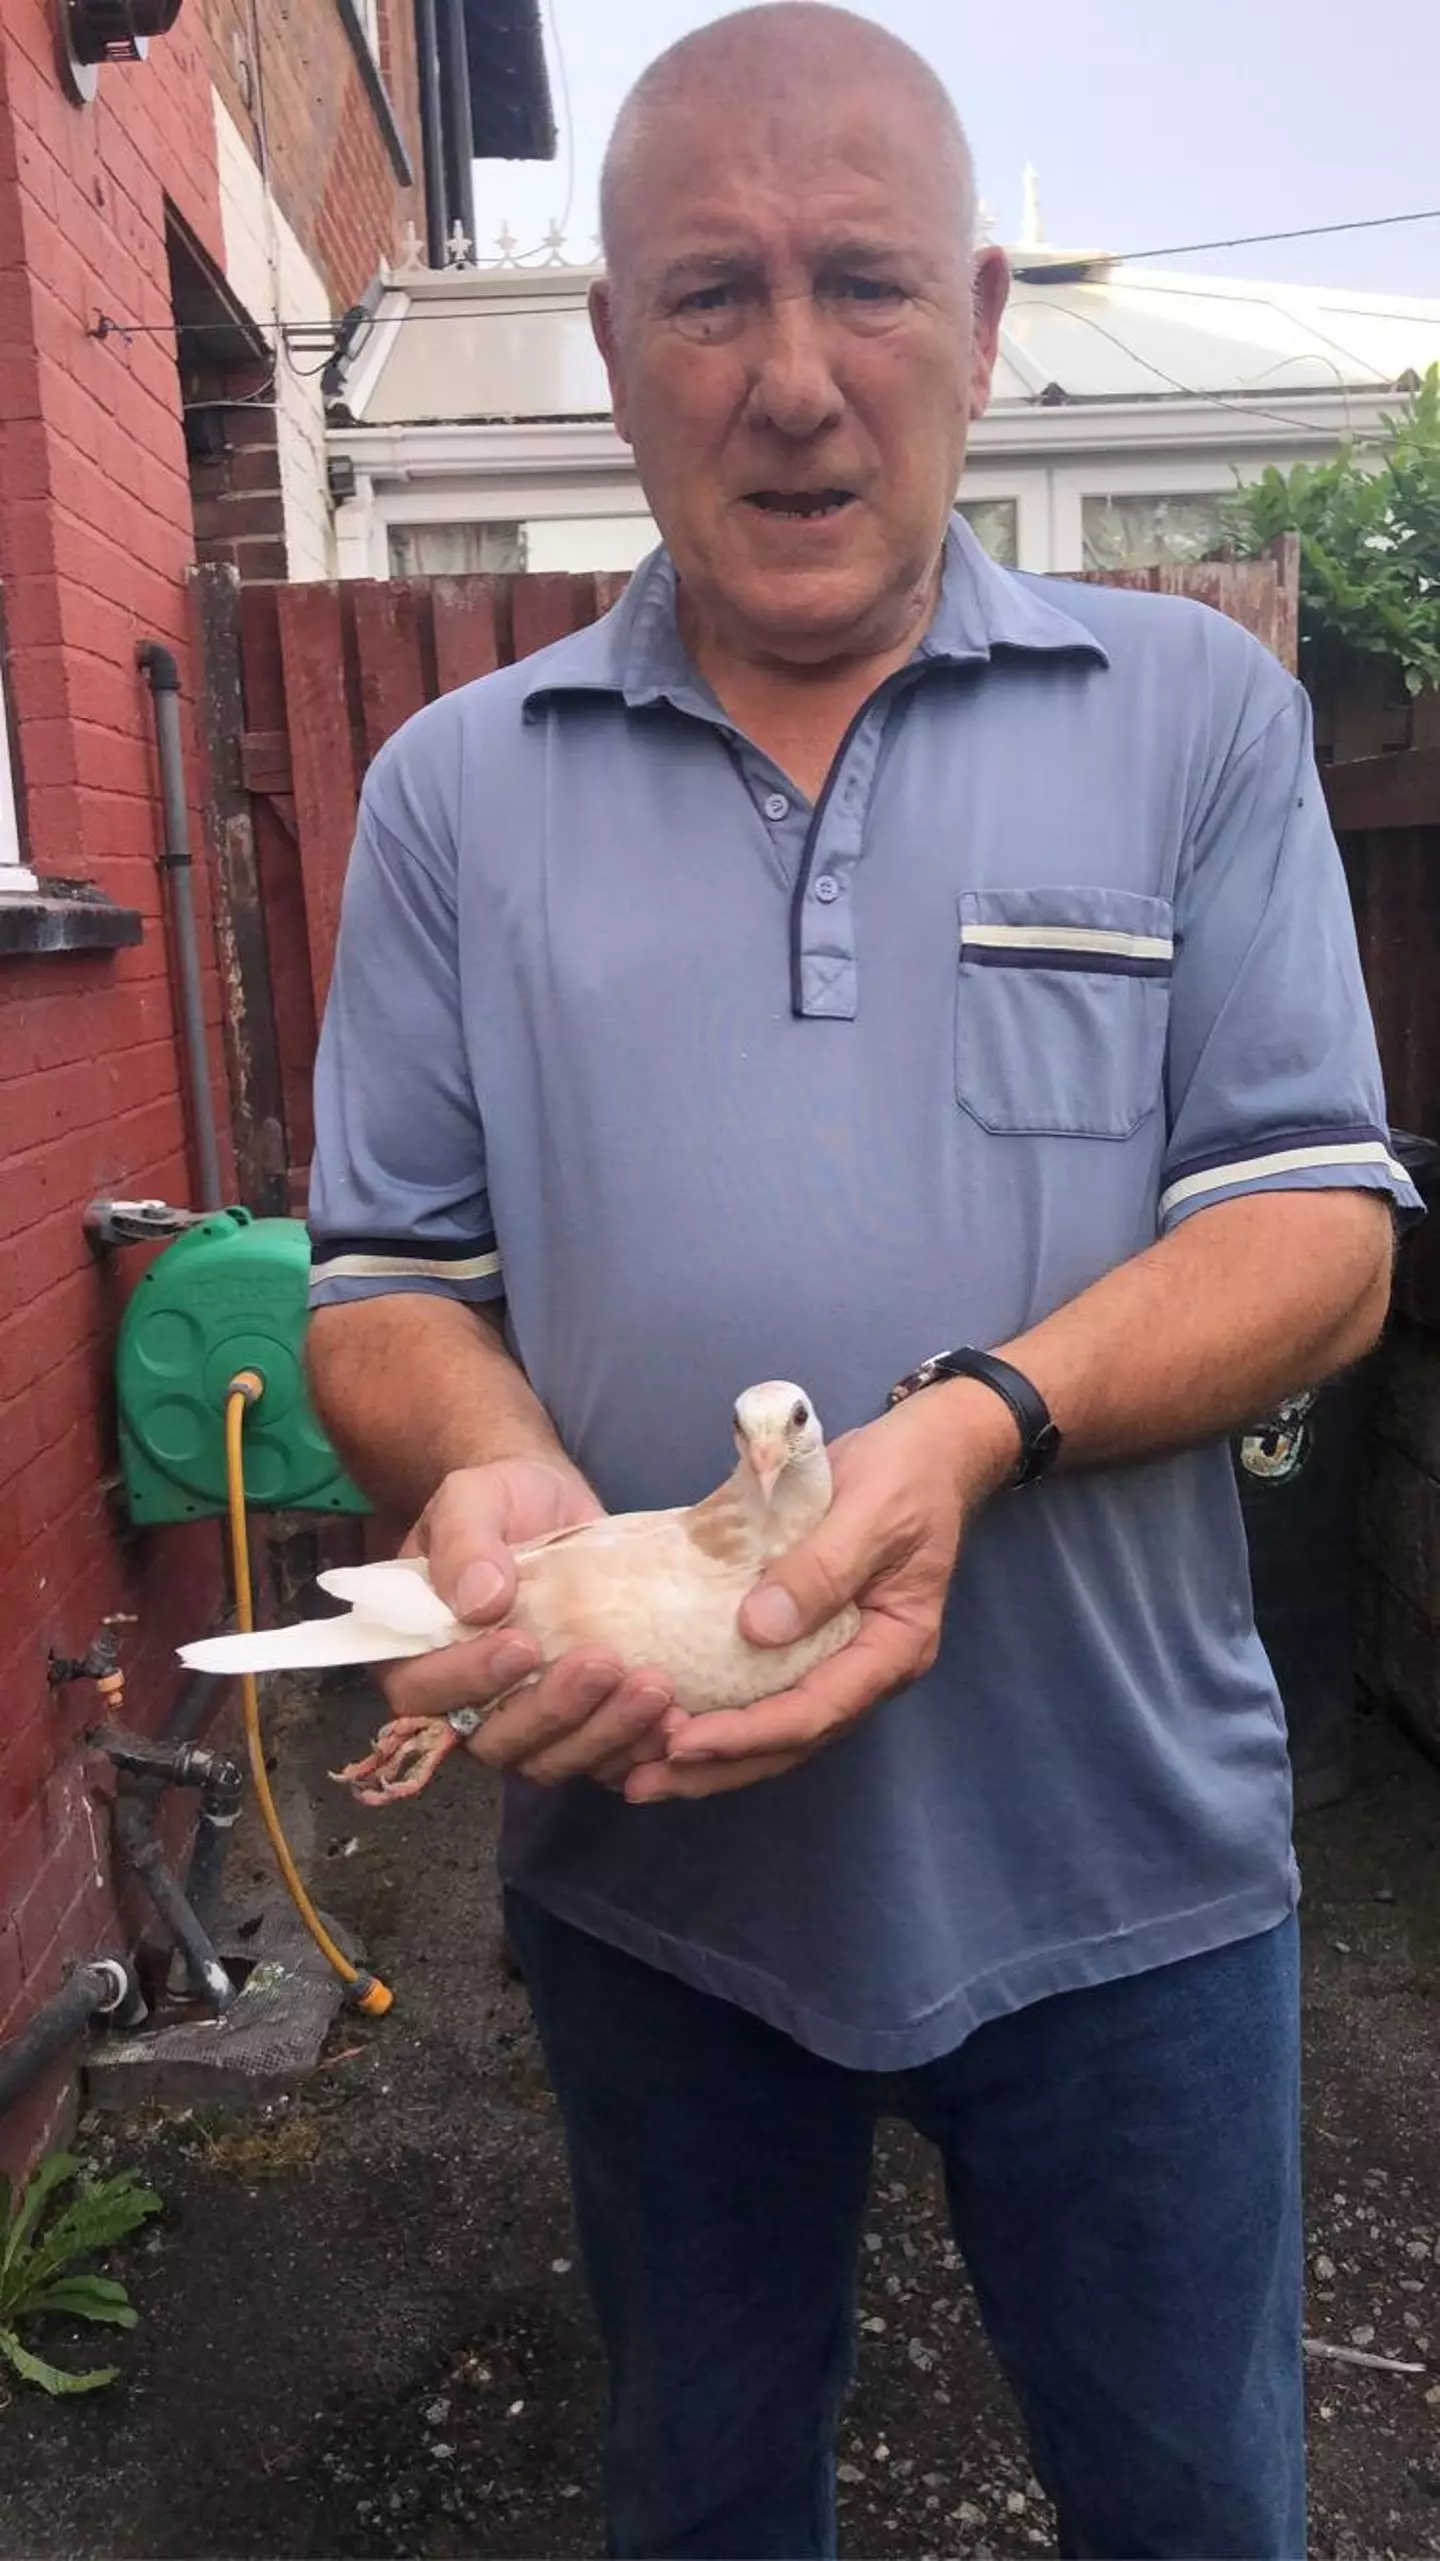 Mick with one of his previous prize-winning birds.